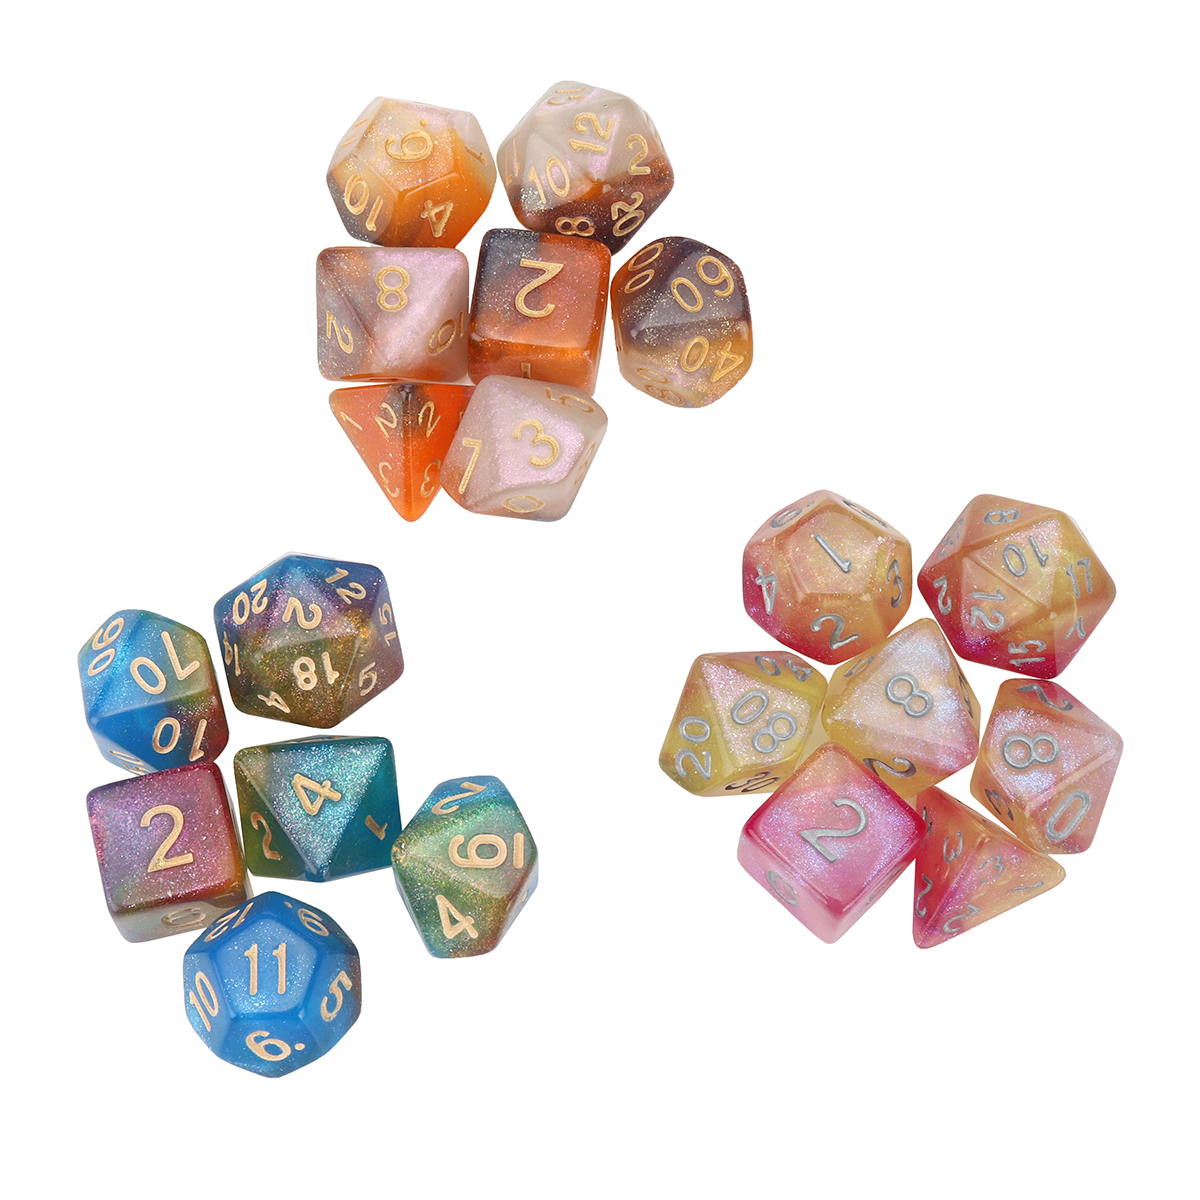 7Pcs-Polyhedral-Dice-Set-Board-Game-Multisided-Dices-Gadget-Acrylic-Polyhedral-Dices-Role-Playing-Ga-1700348-5